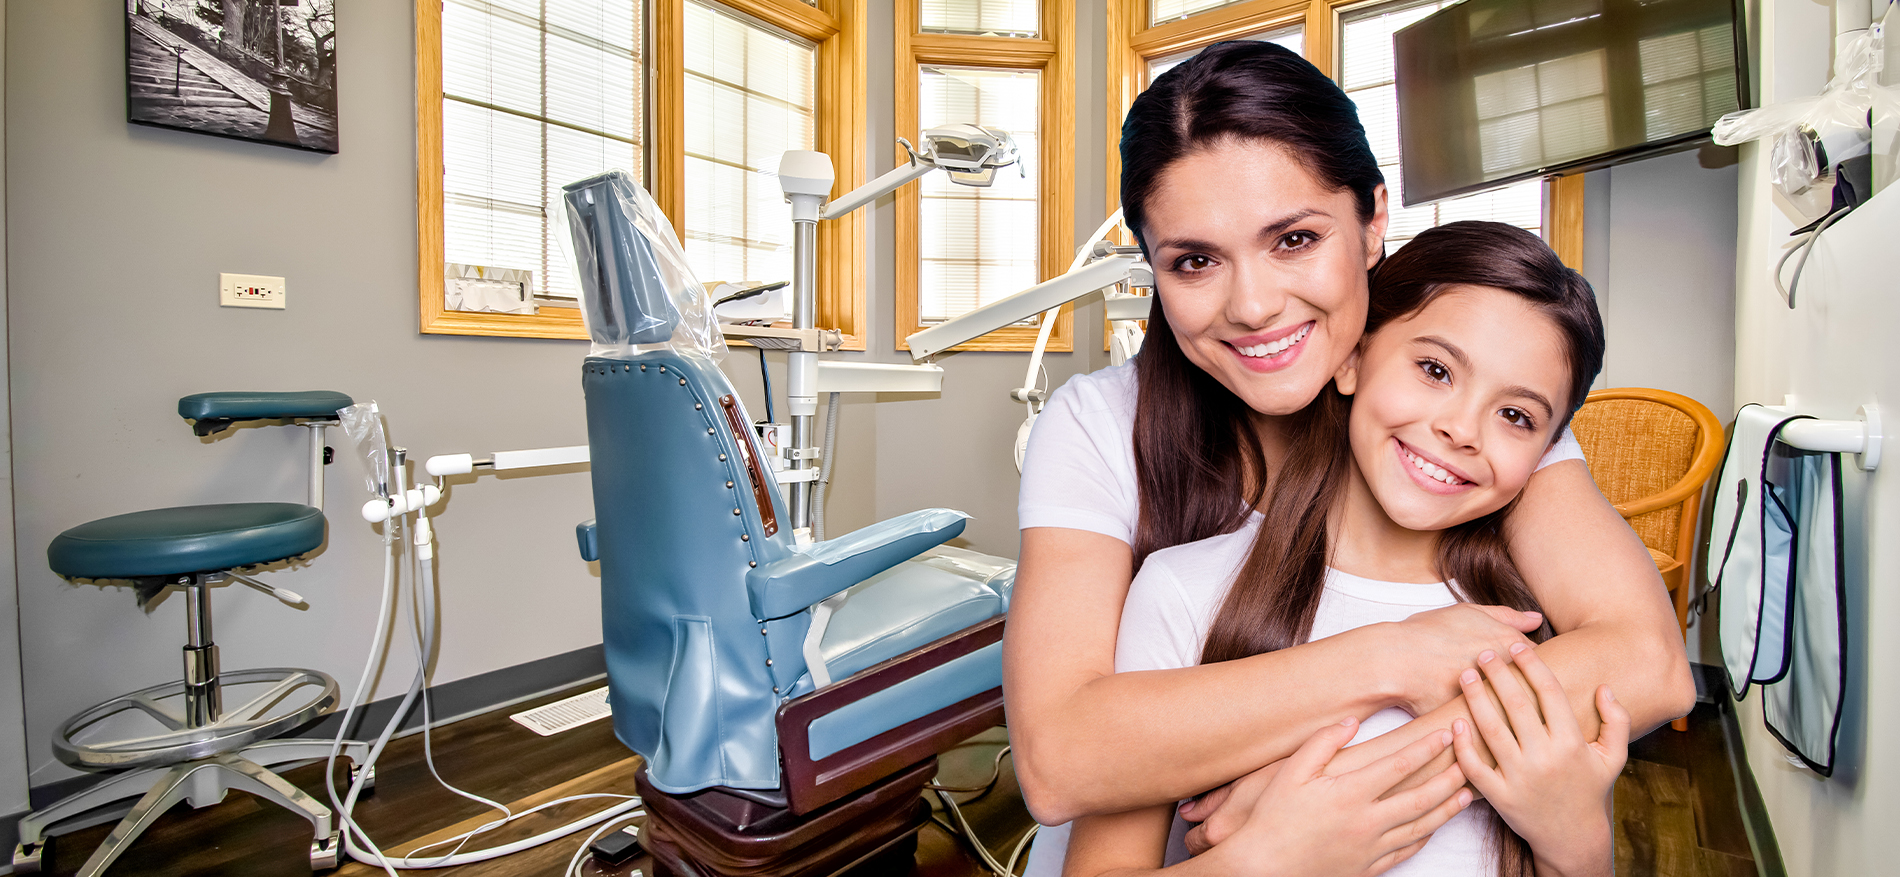 Smiling mother and daughter in dental office treatment room